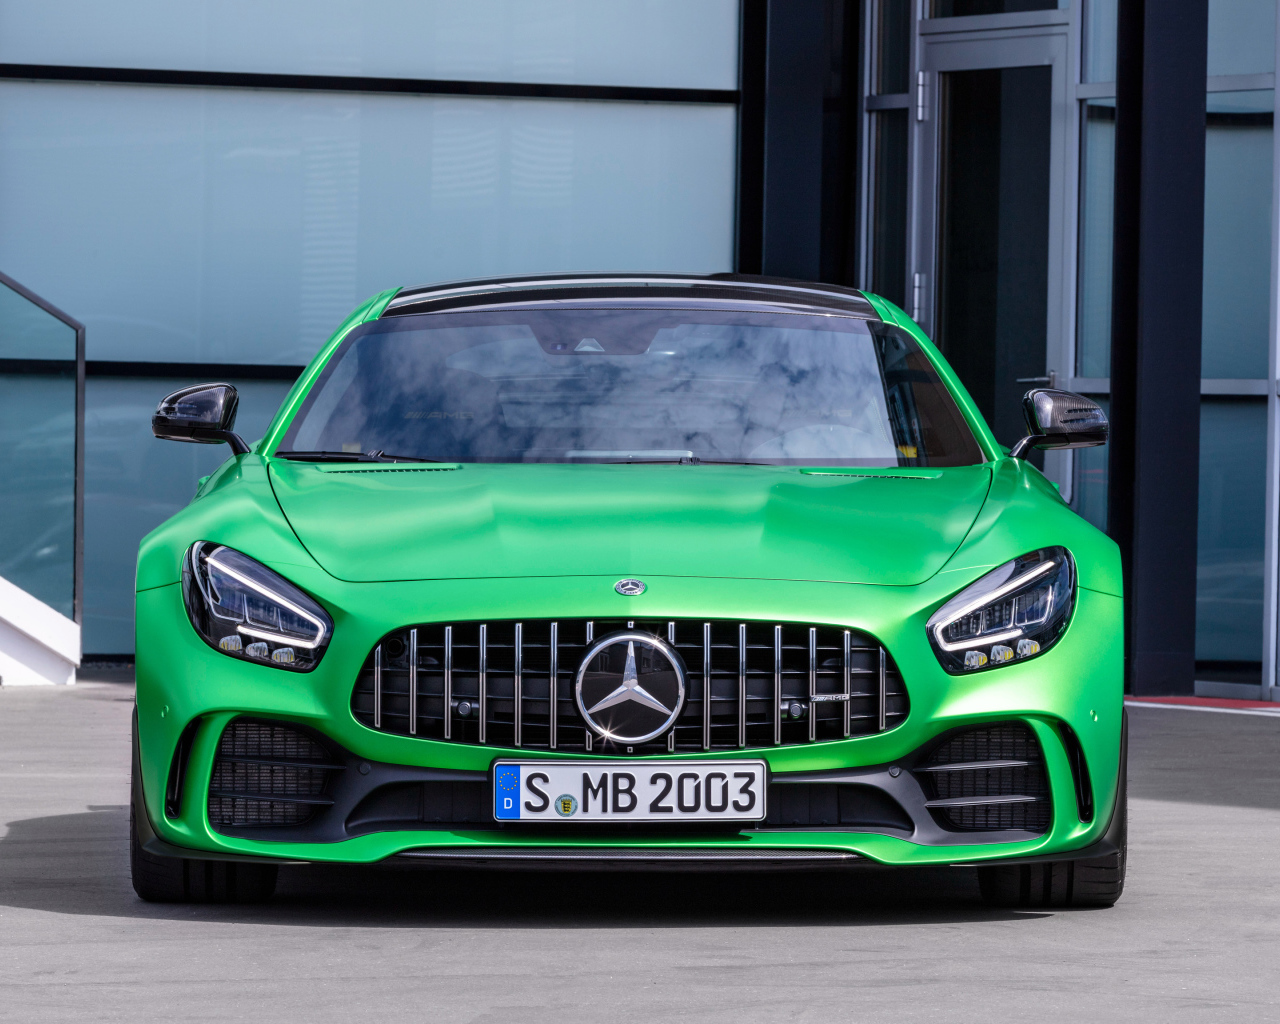 Green car Mercedes-AMG GT R 2019 front view